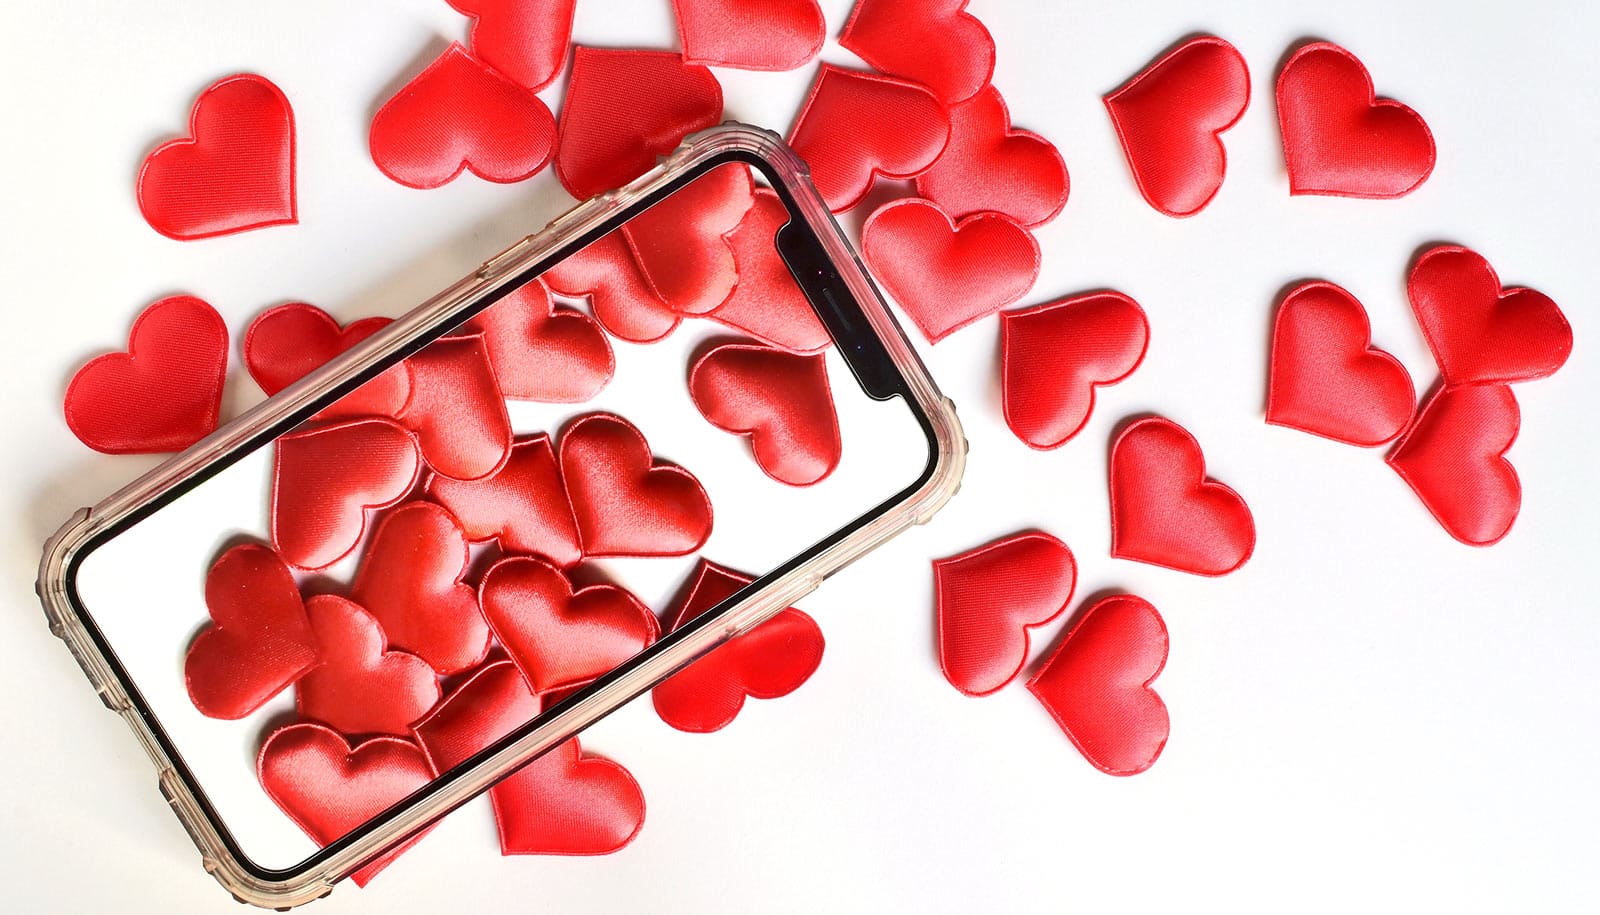 A smartphone with hearts on the screen on top of the same kind of hearts on a white background.